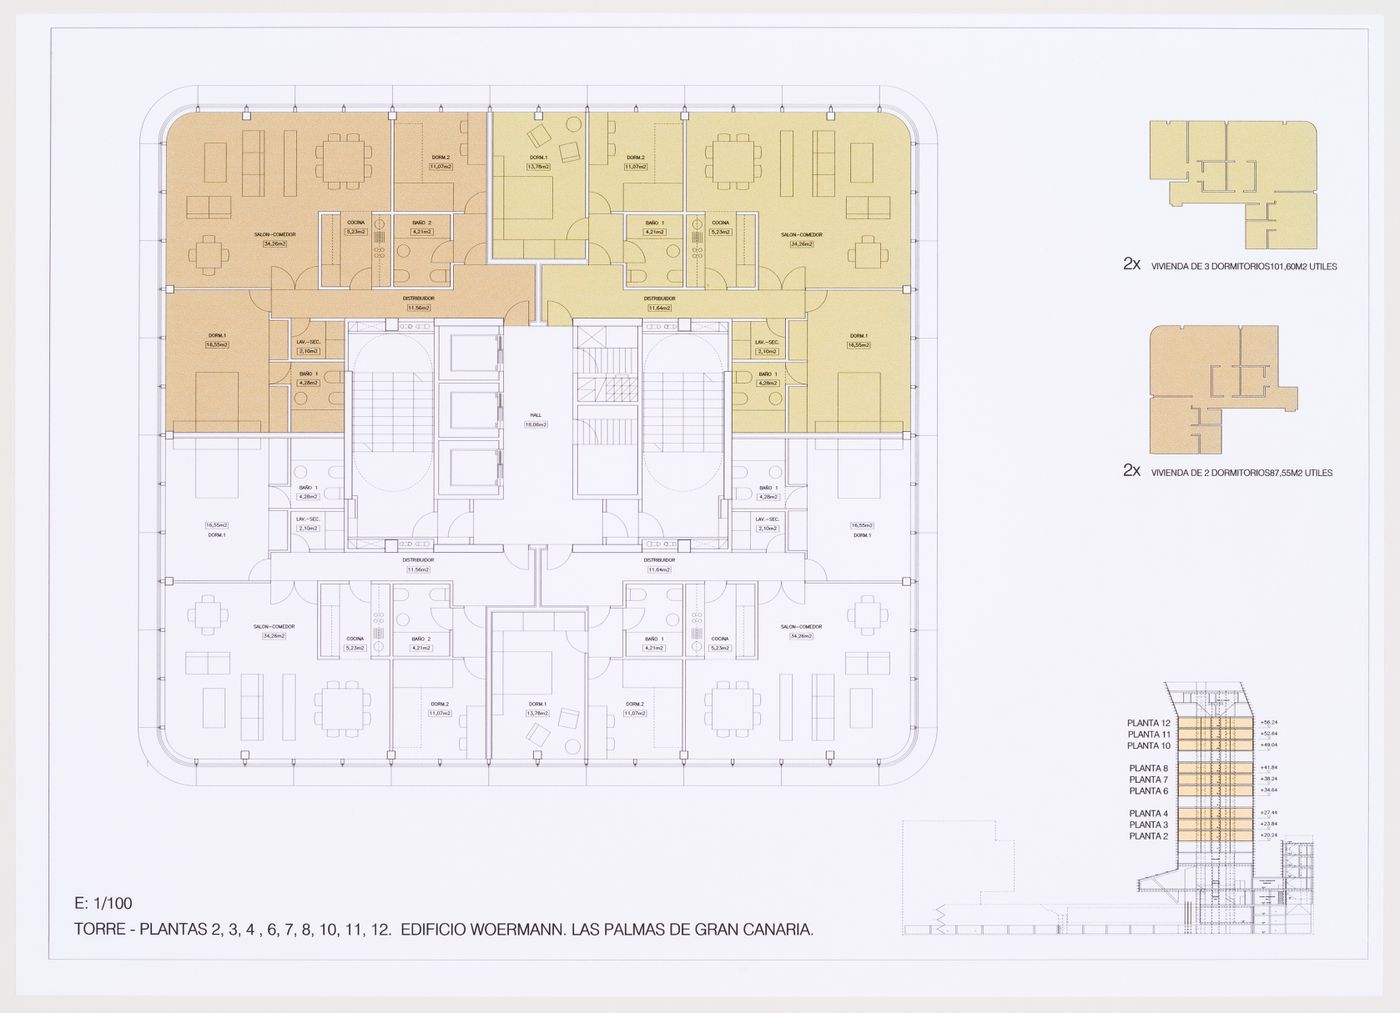 Plans and section, Plaza y torre Woermann, Las Palmas, Canary Islands